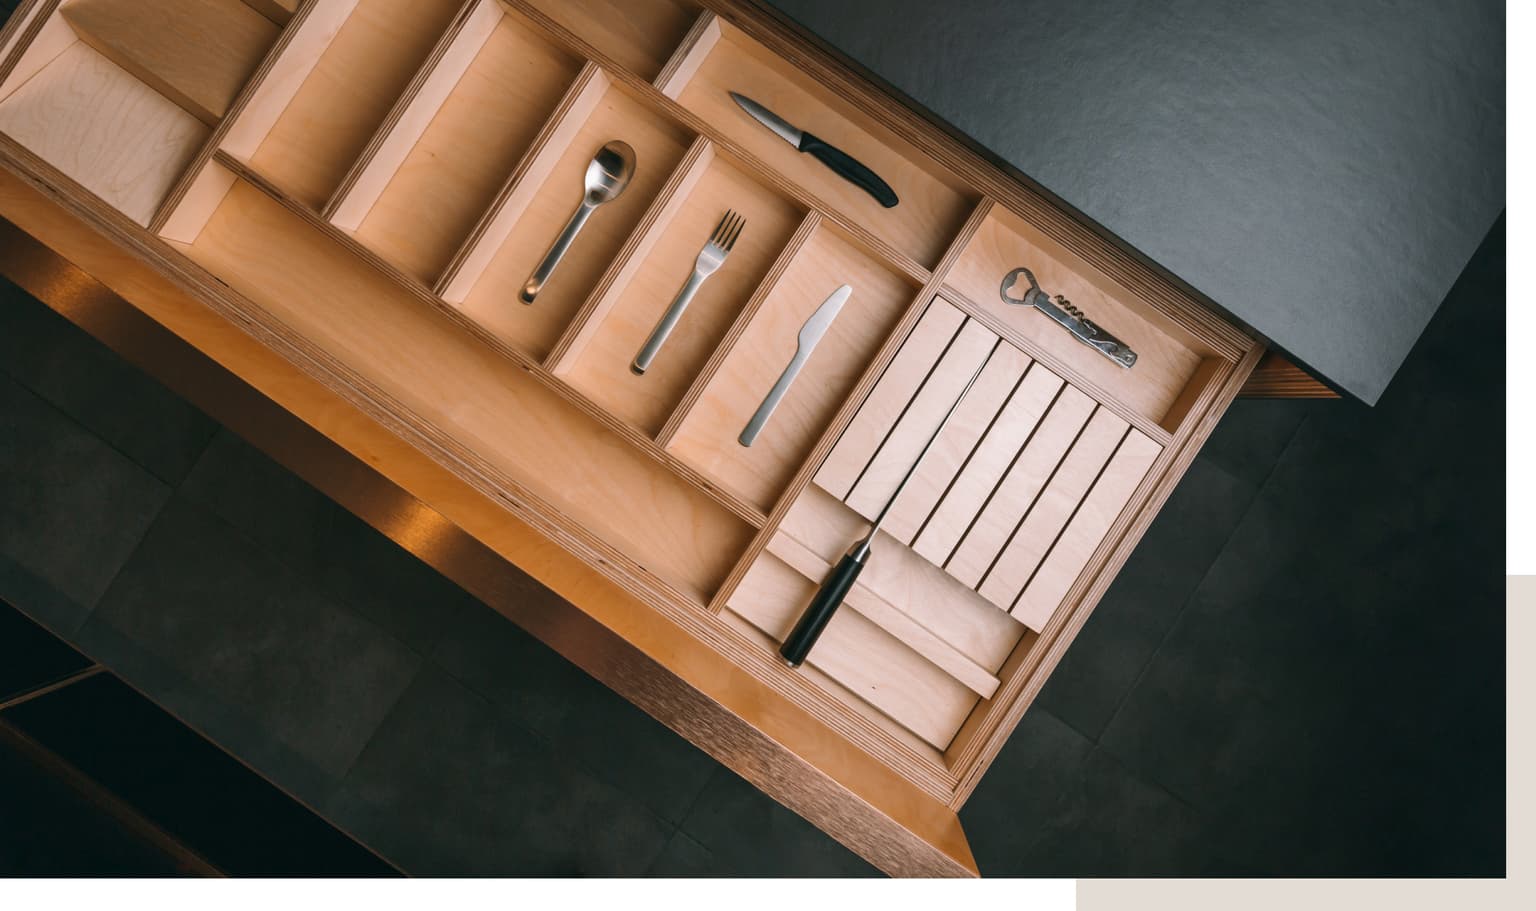 Swoon-worthy detailing on drawers and doors